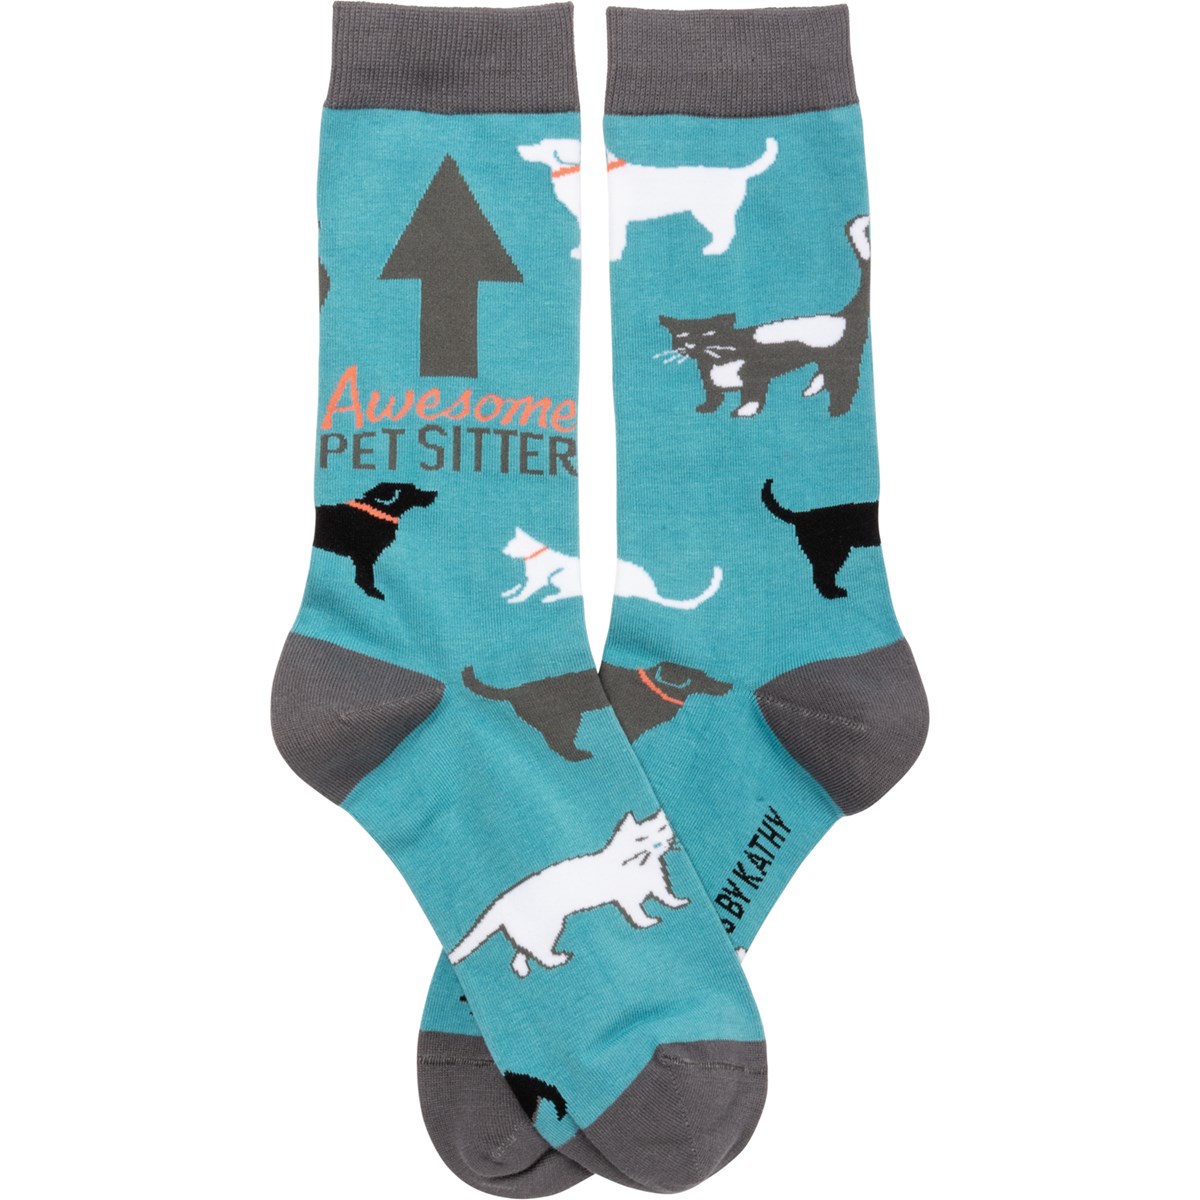 Socks - Awesome Pet Sitter - One Size Fits Most - Cotton, Nylon, Spandex